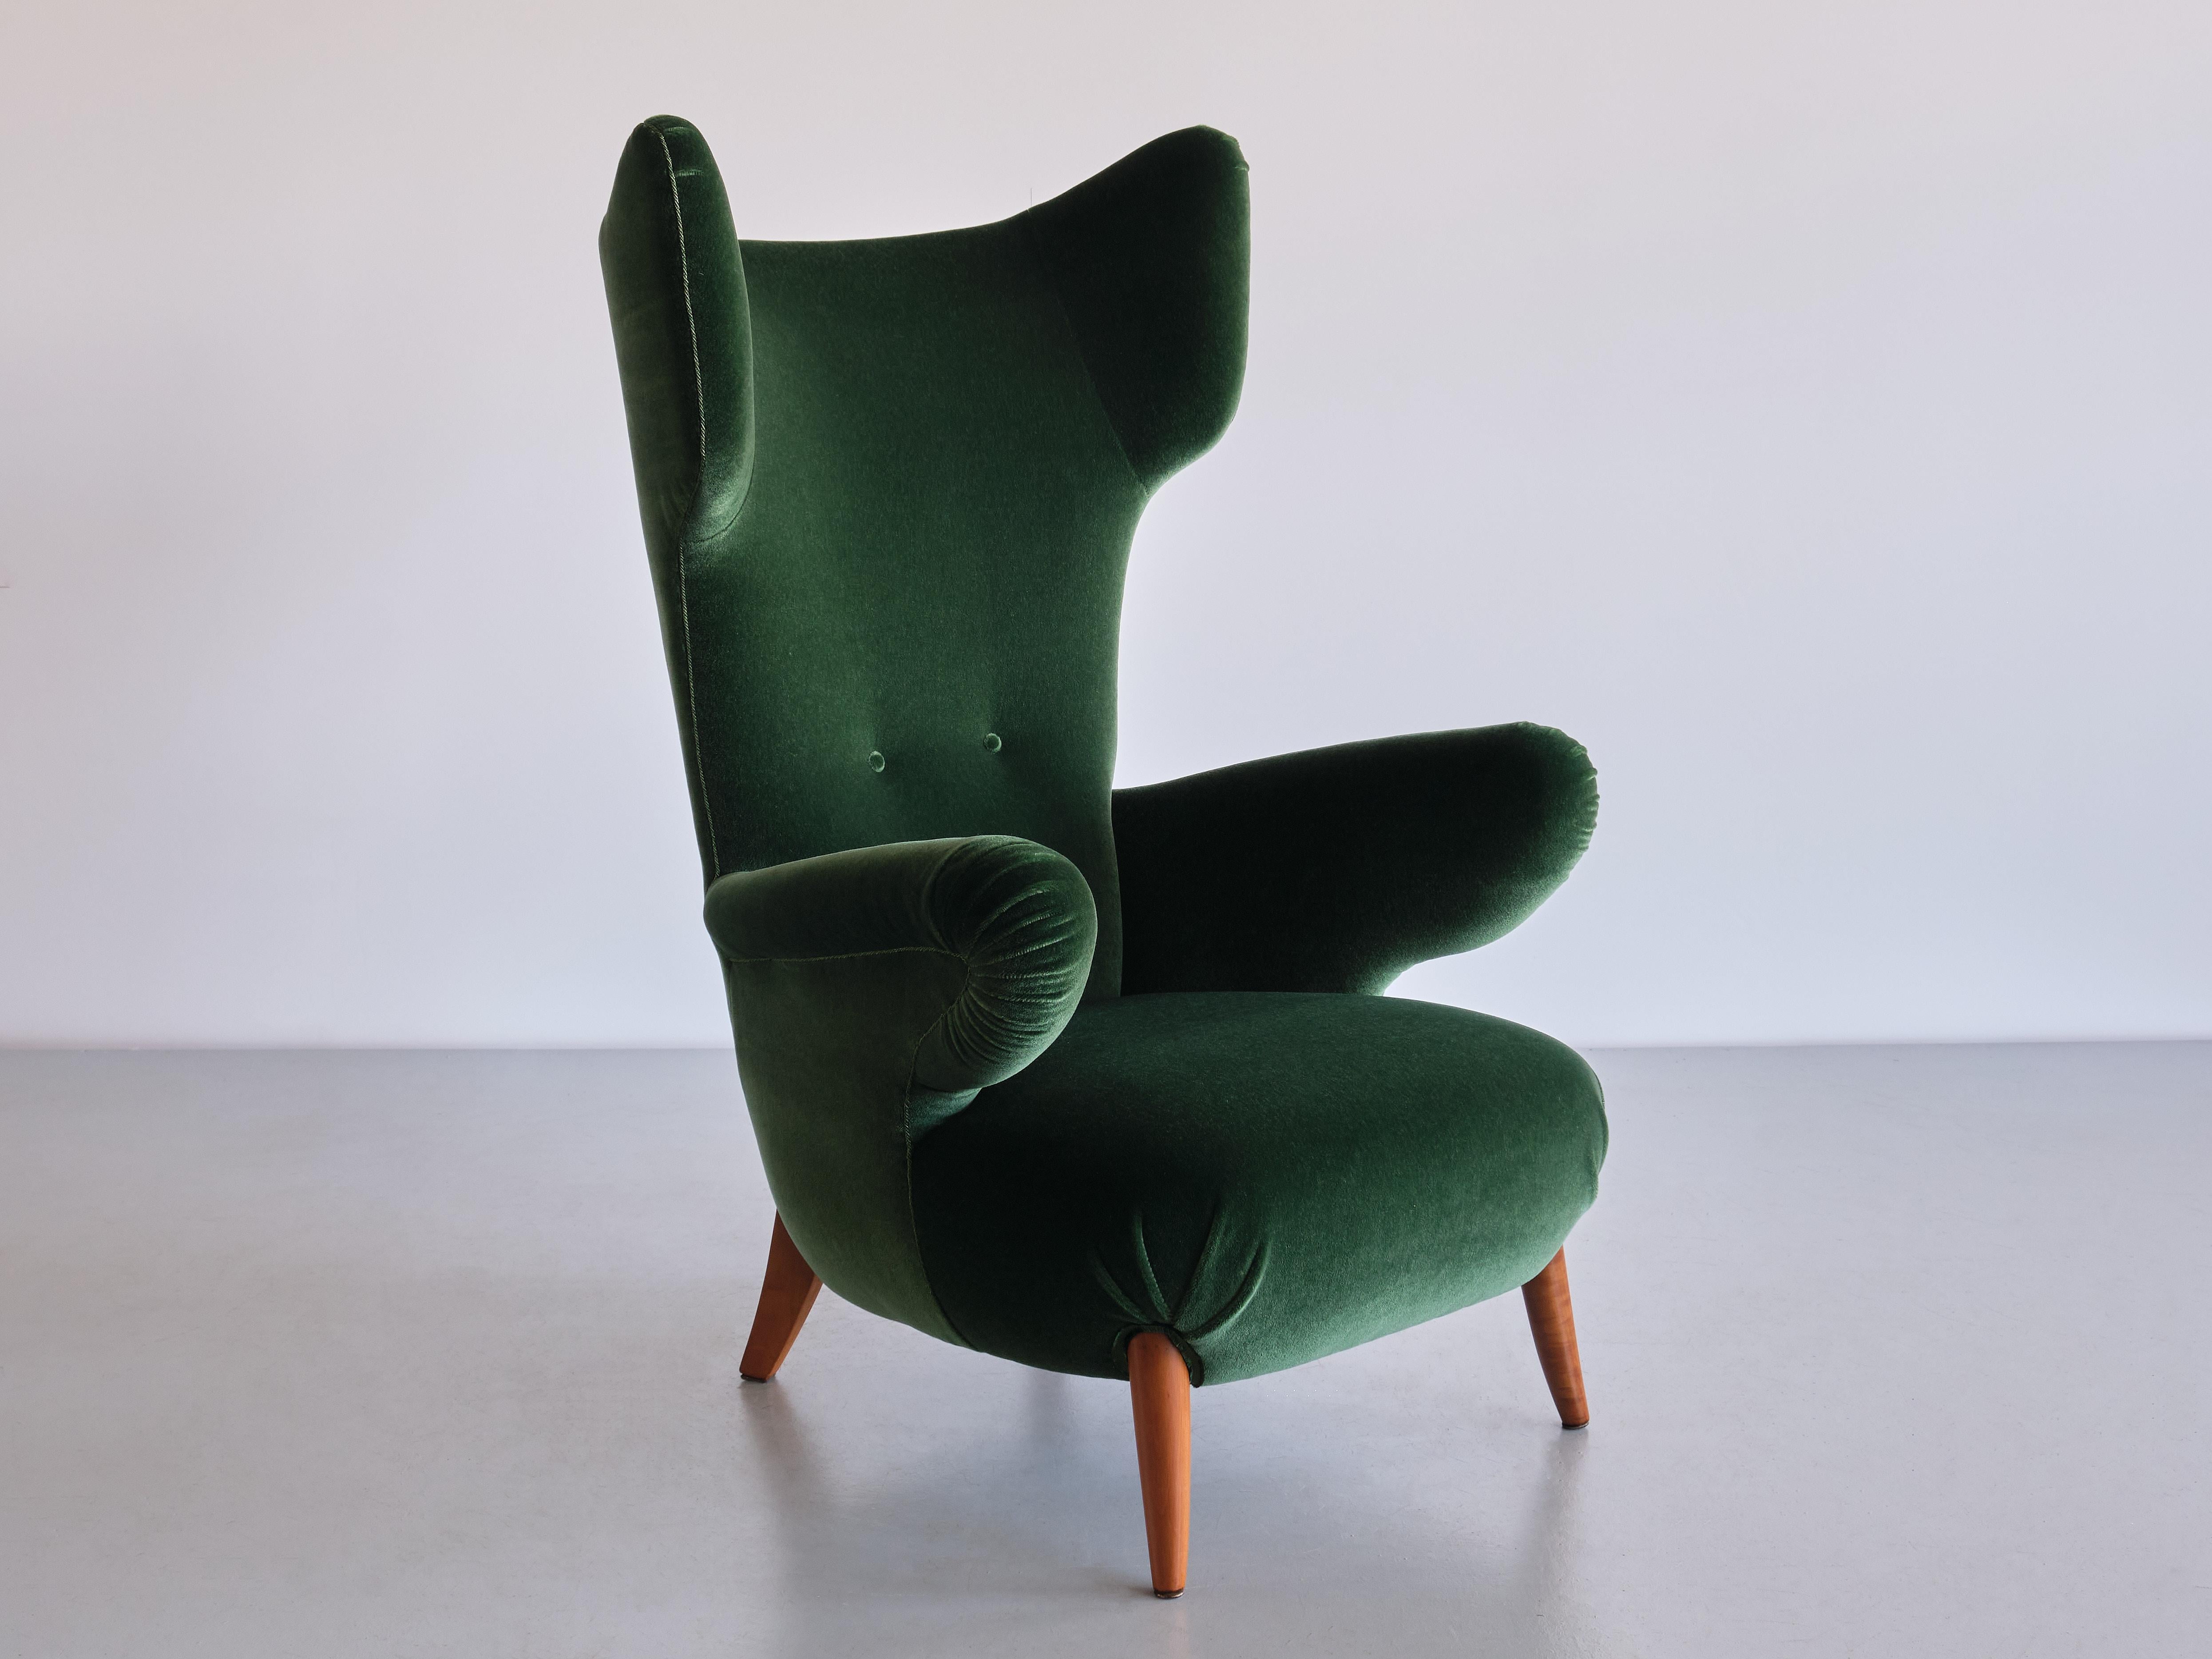 This exceptional wingback chair was designed by Ottorino Aloisio in 1957. The chair was manufactured by the Turin workshop of Pier Luigi Colli. 

The organically curved lines of the winged back and the armrests create a striking and elegant